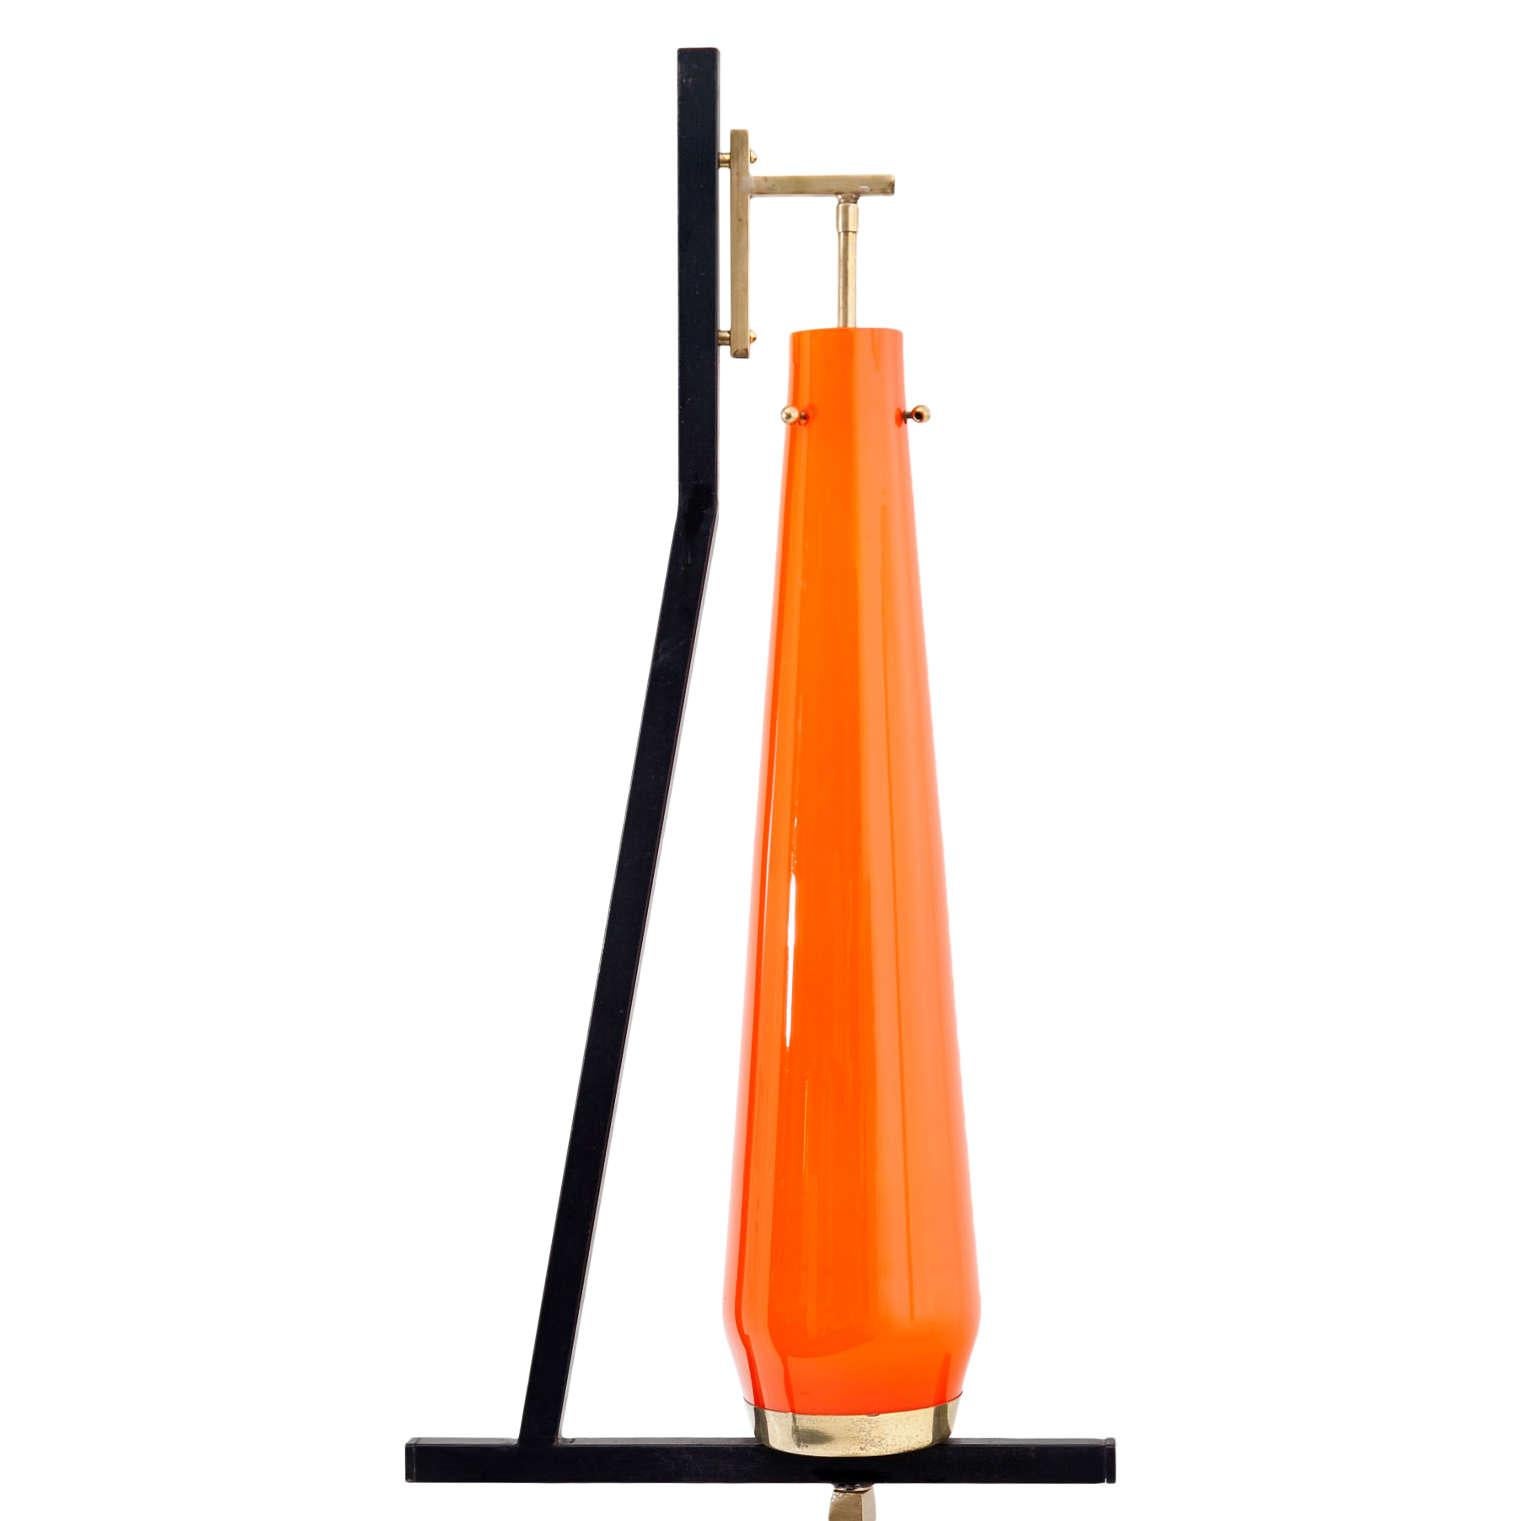 Floor lamp standing on a round marble base, with brass shaft and an orange cone-shaped glass shade. In working condition. 

For the electrification we assume no liability and no warranty.